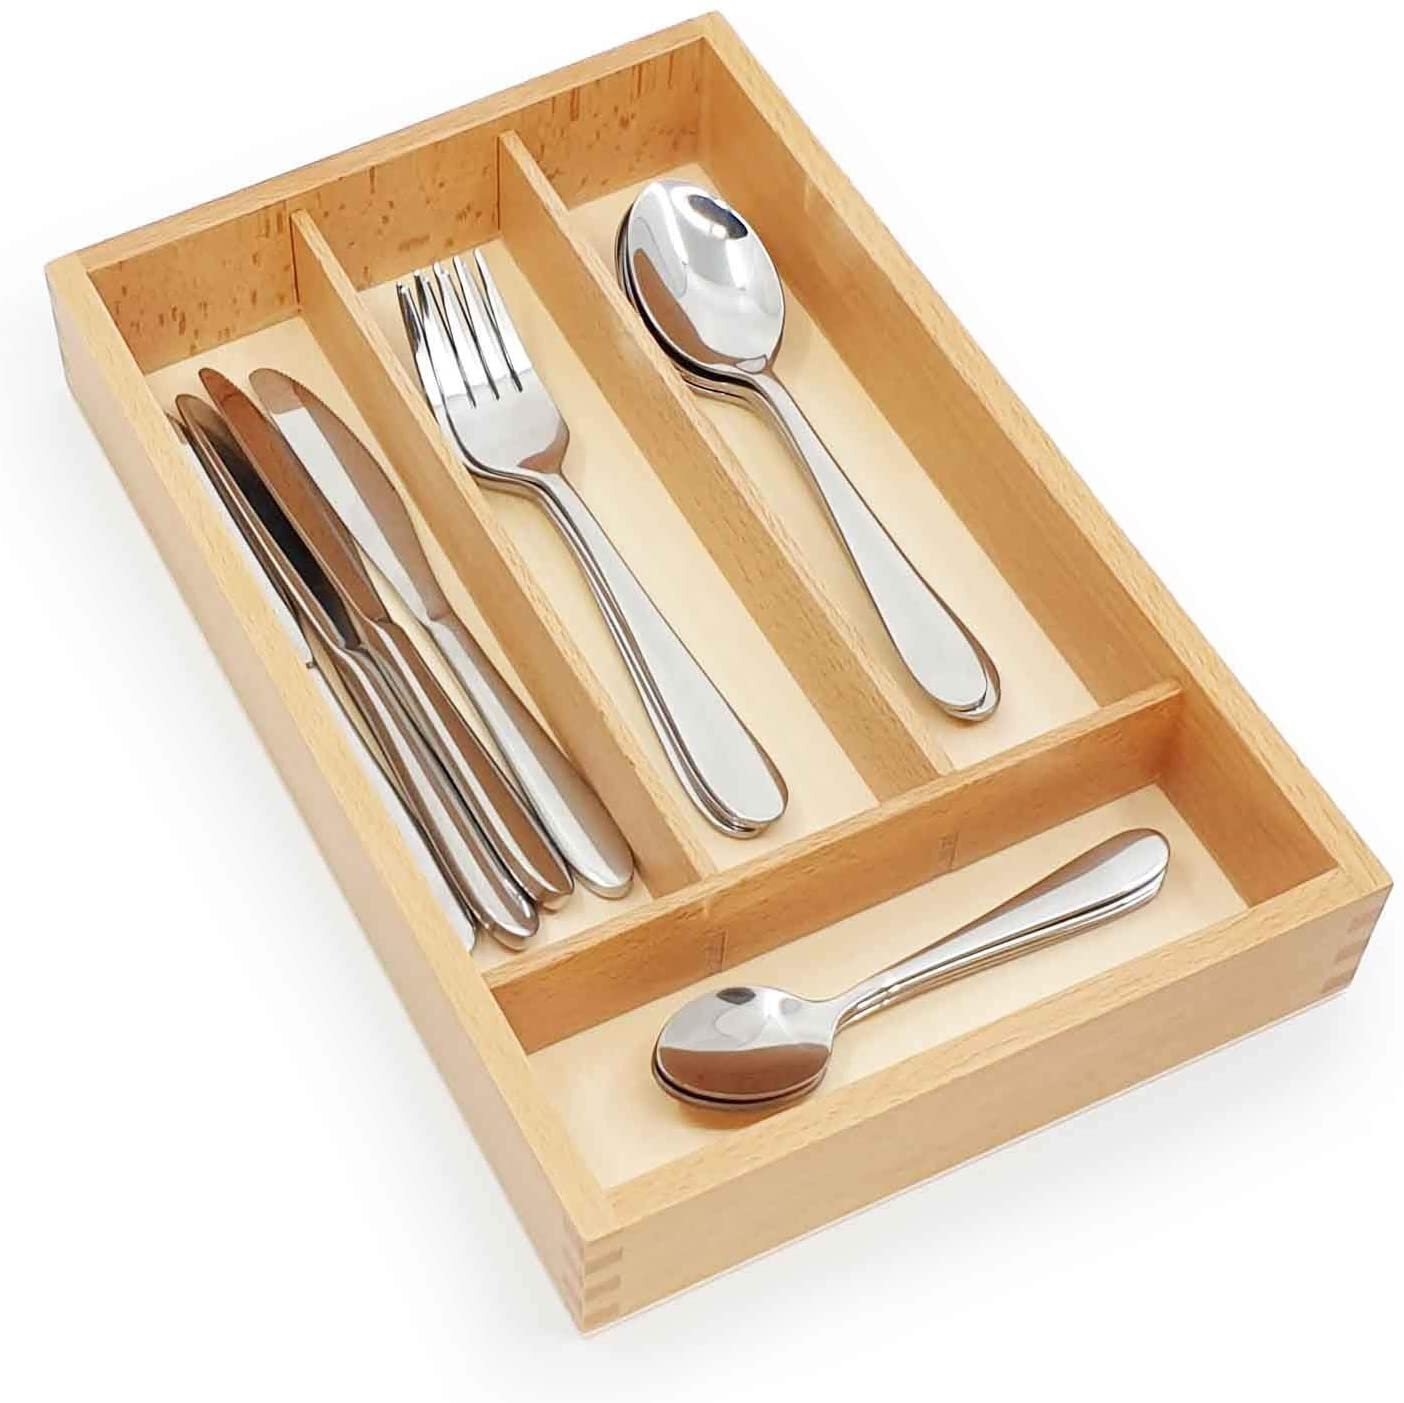 cutlery and tray